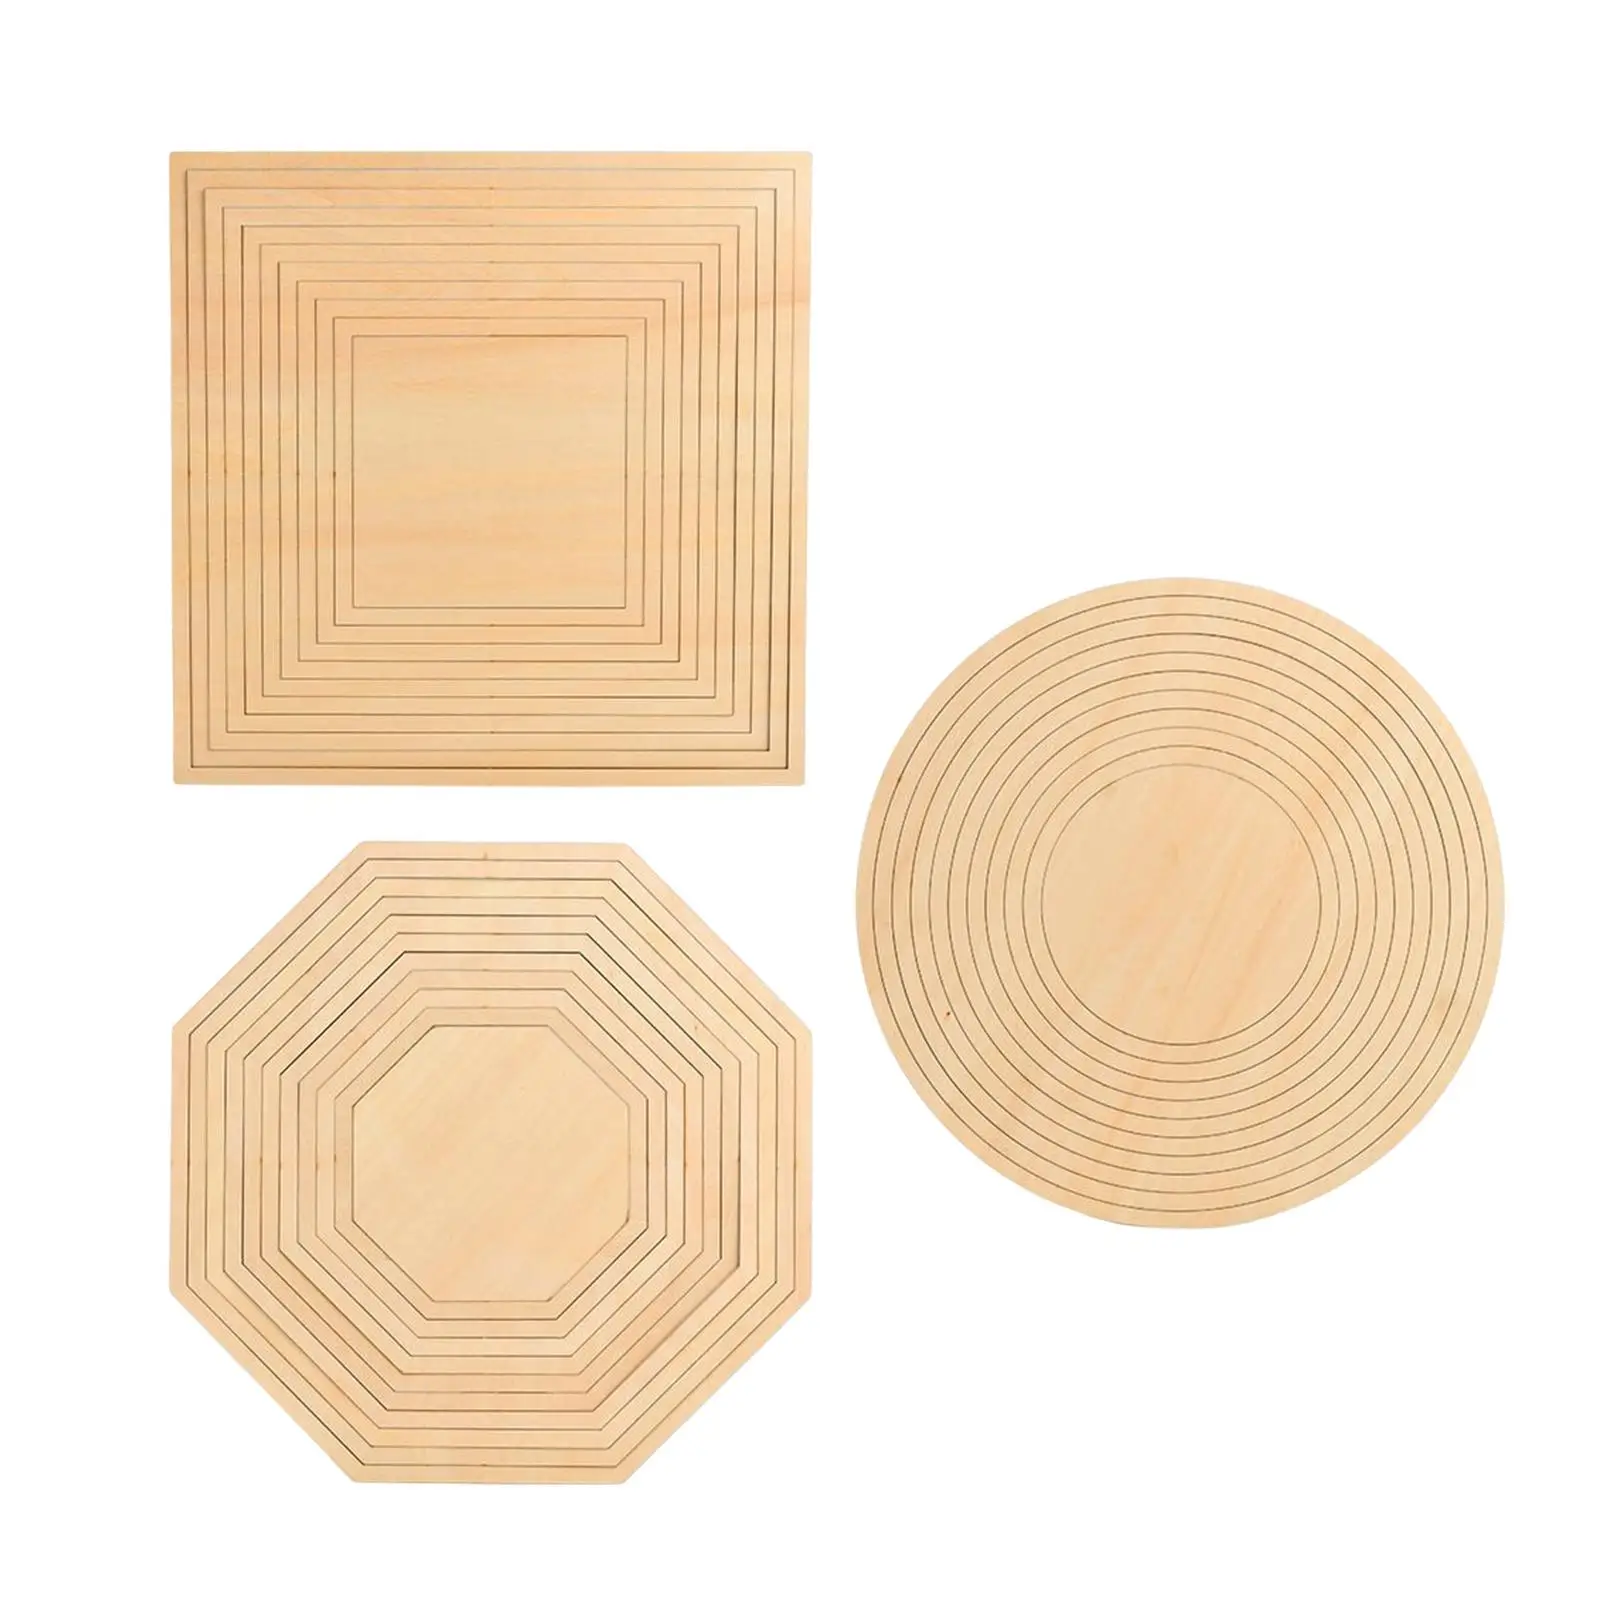 Geometric Figure Rail Set Clay Tools Cutter Accessories Plate for Molding Ceramic